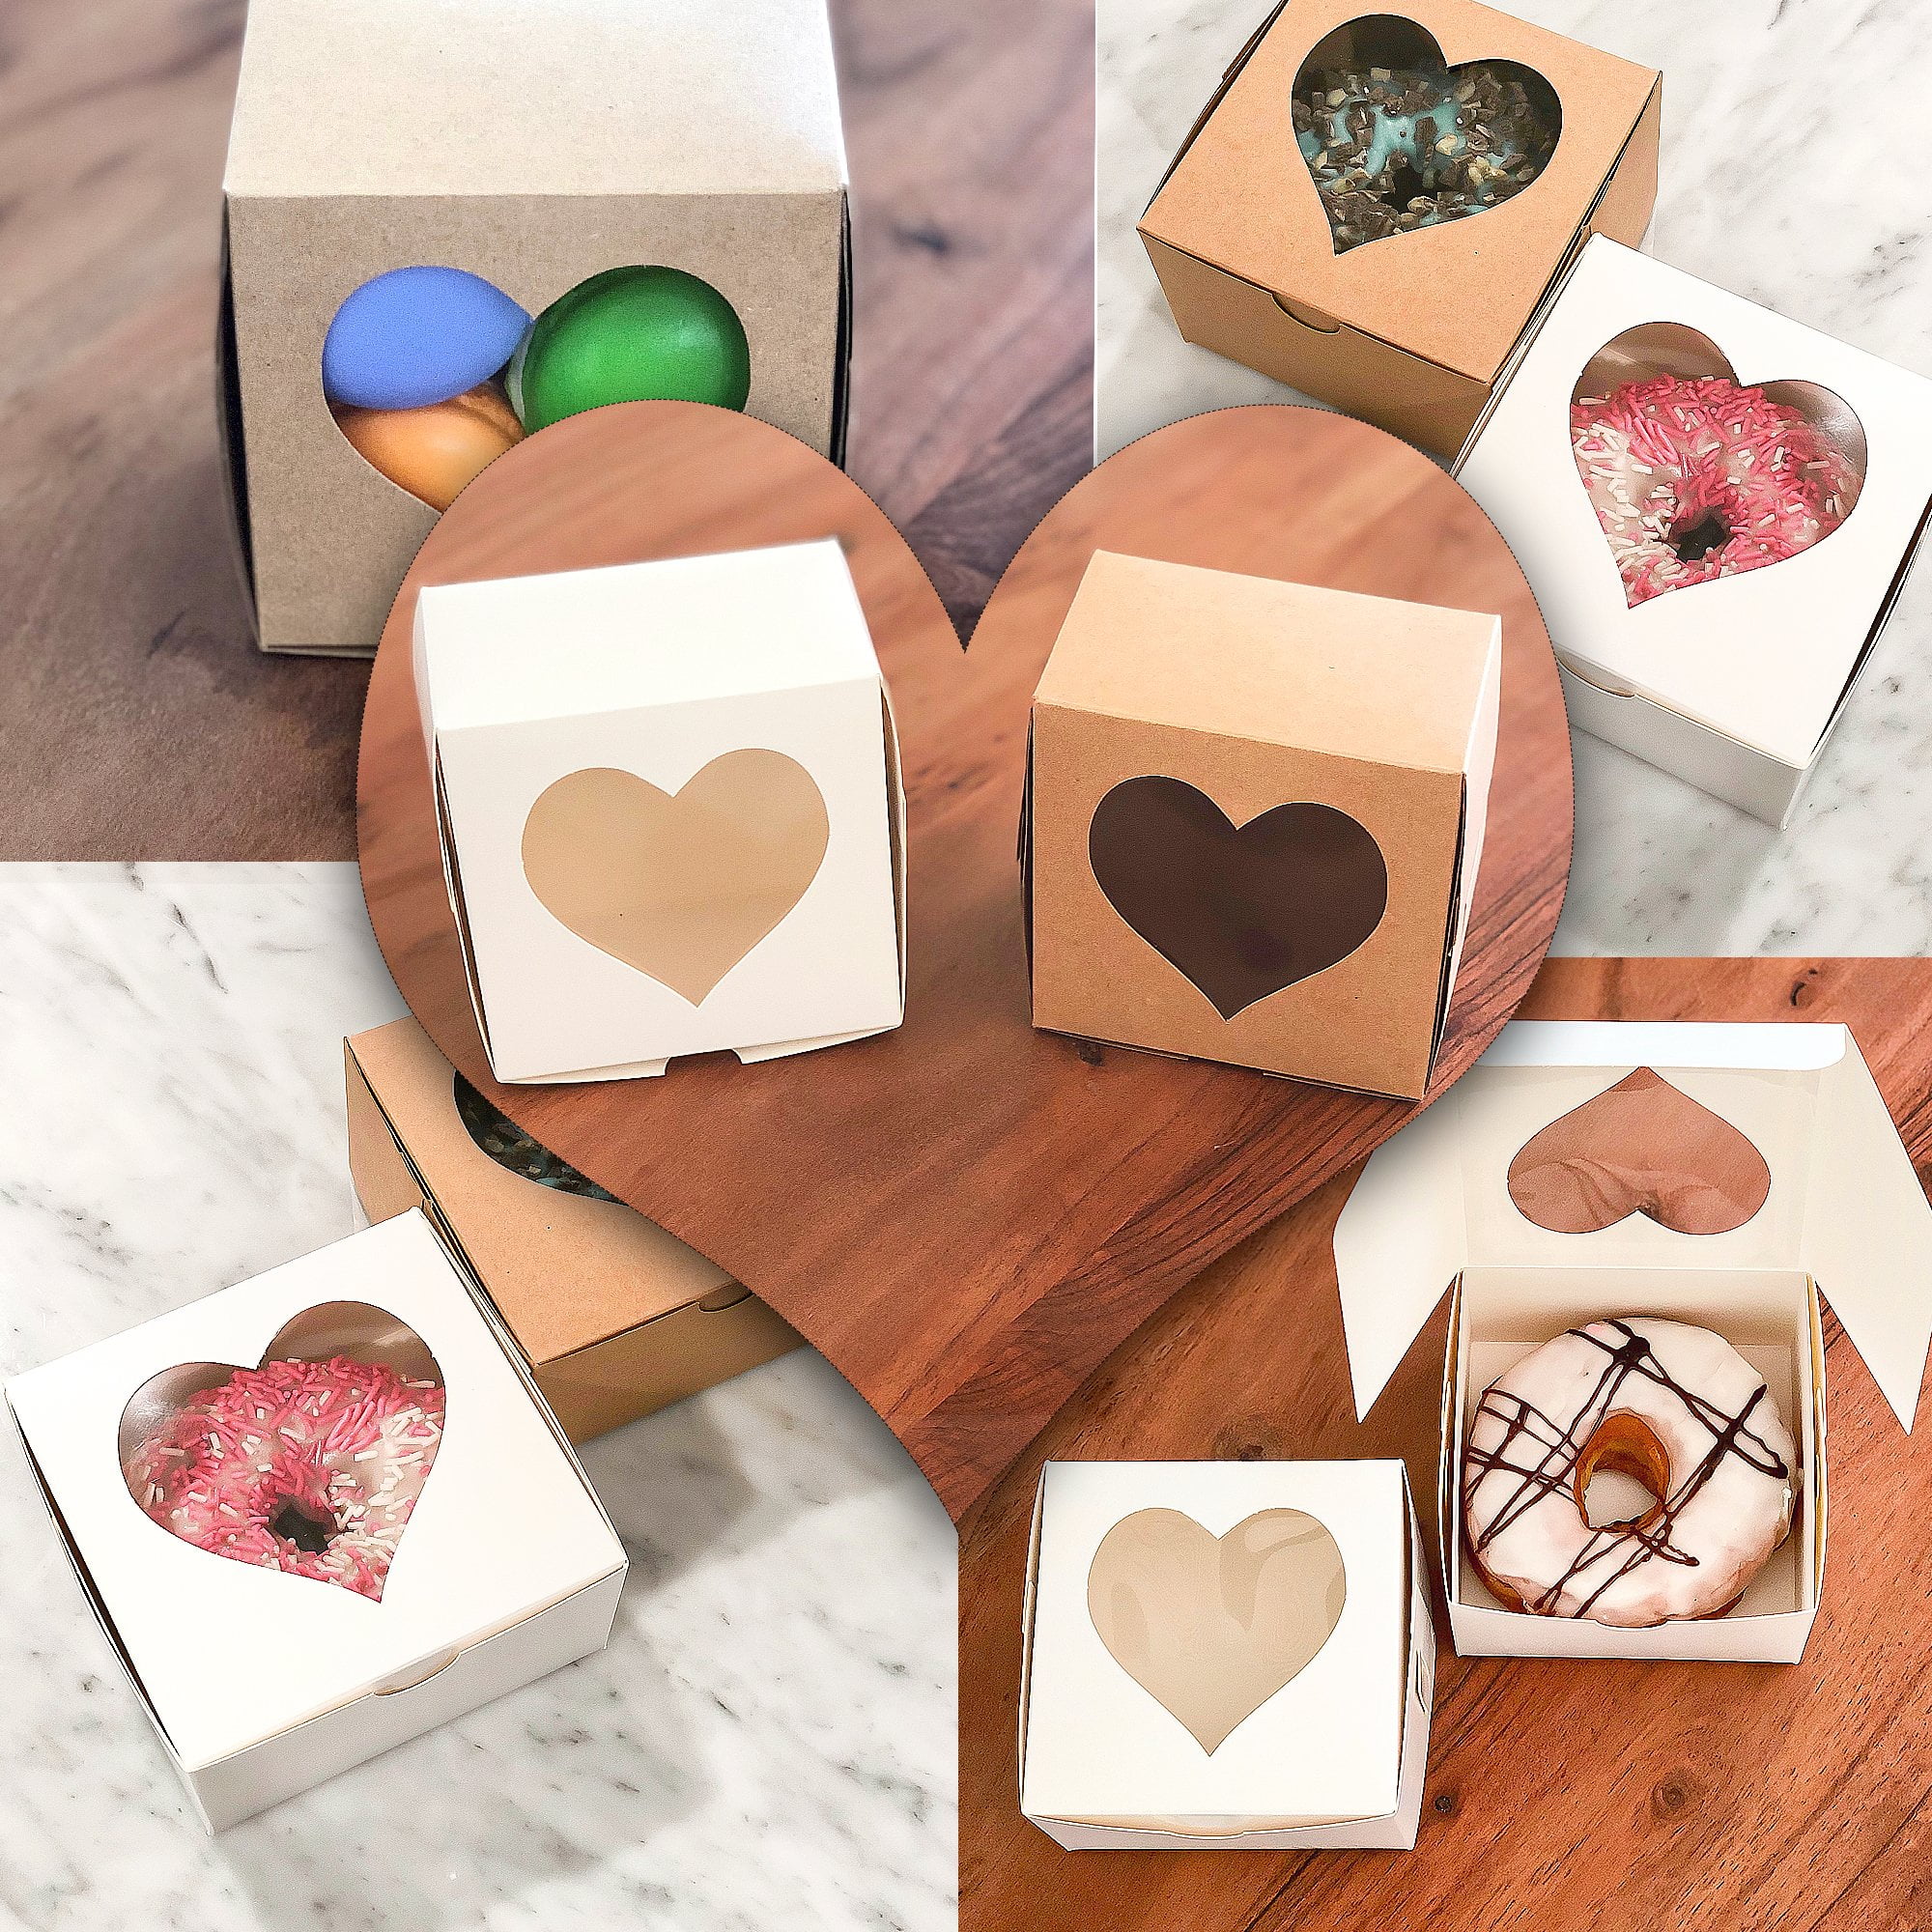  RomanticBaking 50 Pack Single Cookies Boxes 4 3/8 x 4 3/8 x 1  1/5 Bakery Boxes for Wedding Favors Party : Health & Household